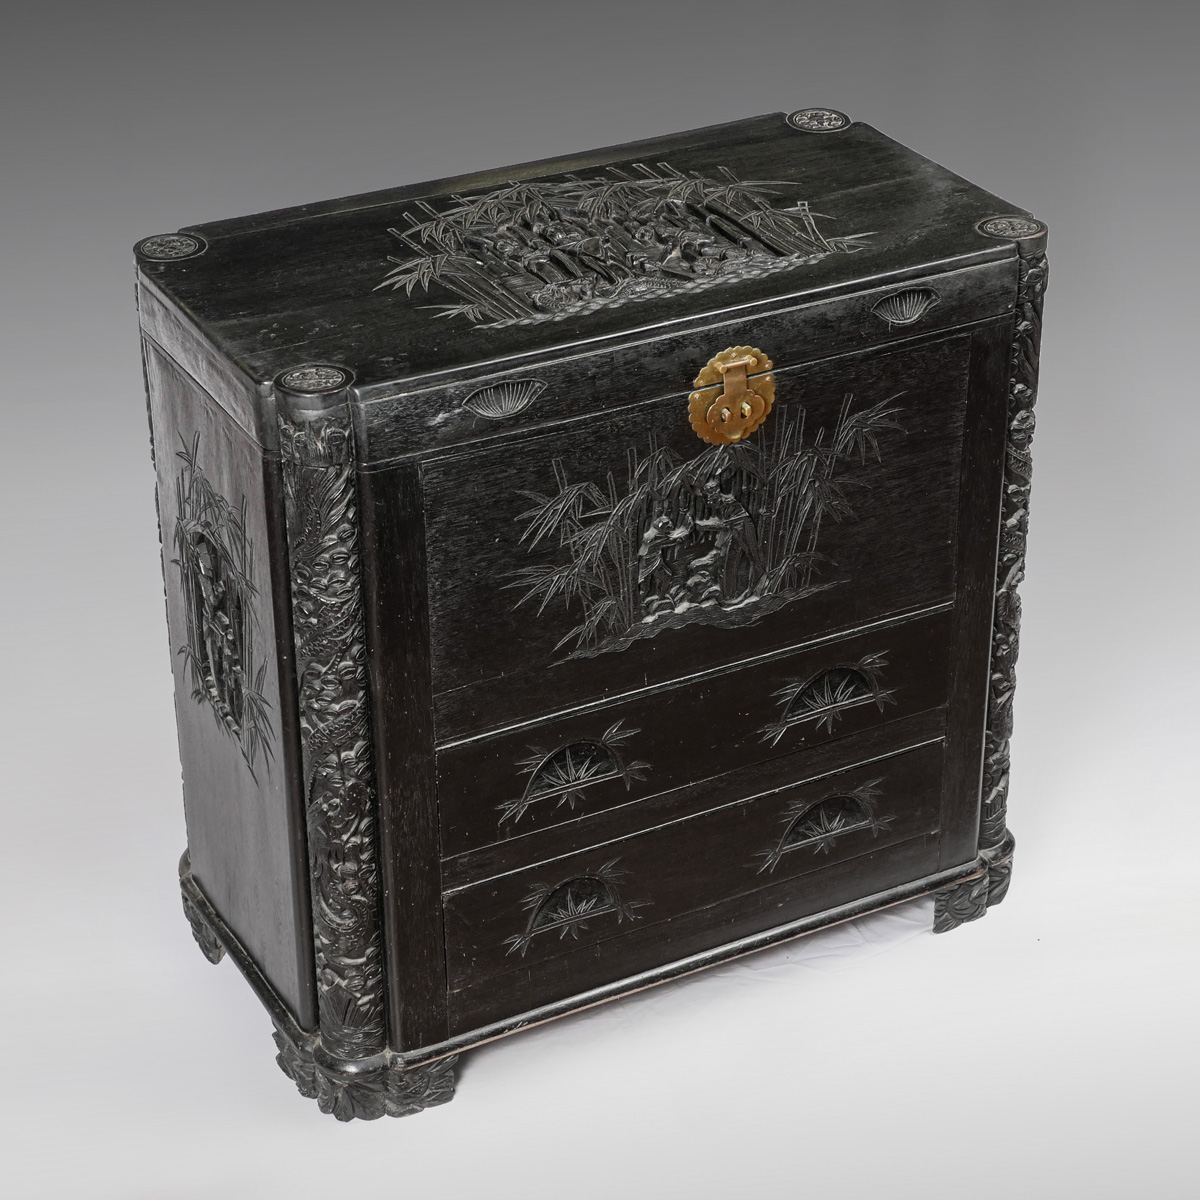 CARVED CHINESE CHEST: Handmade Chinese